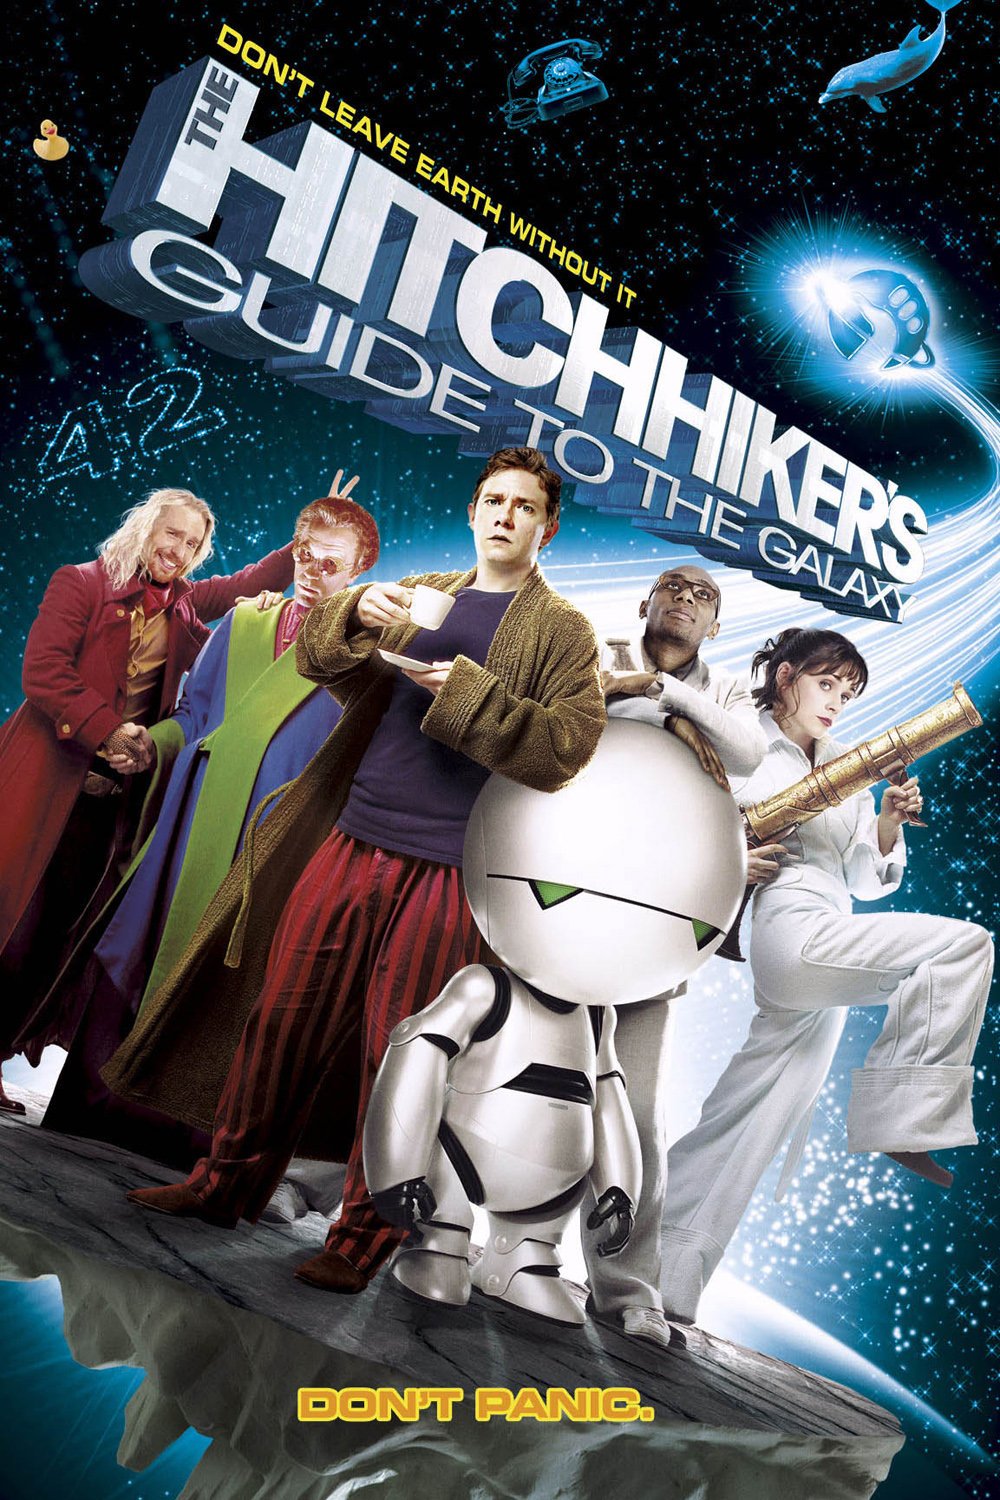 The Hitchhikers Guide to the Galaxy 2005